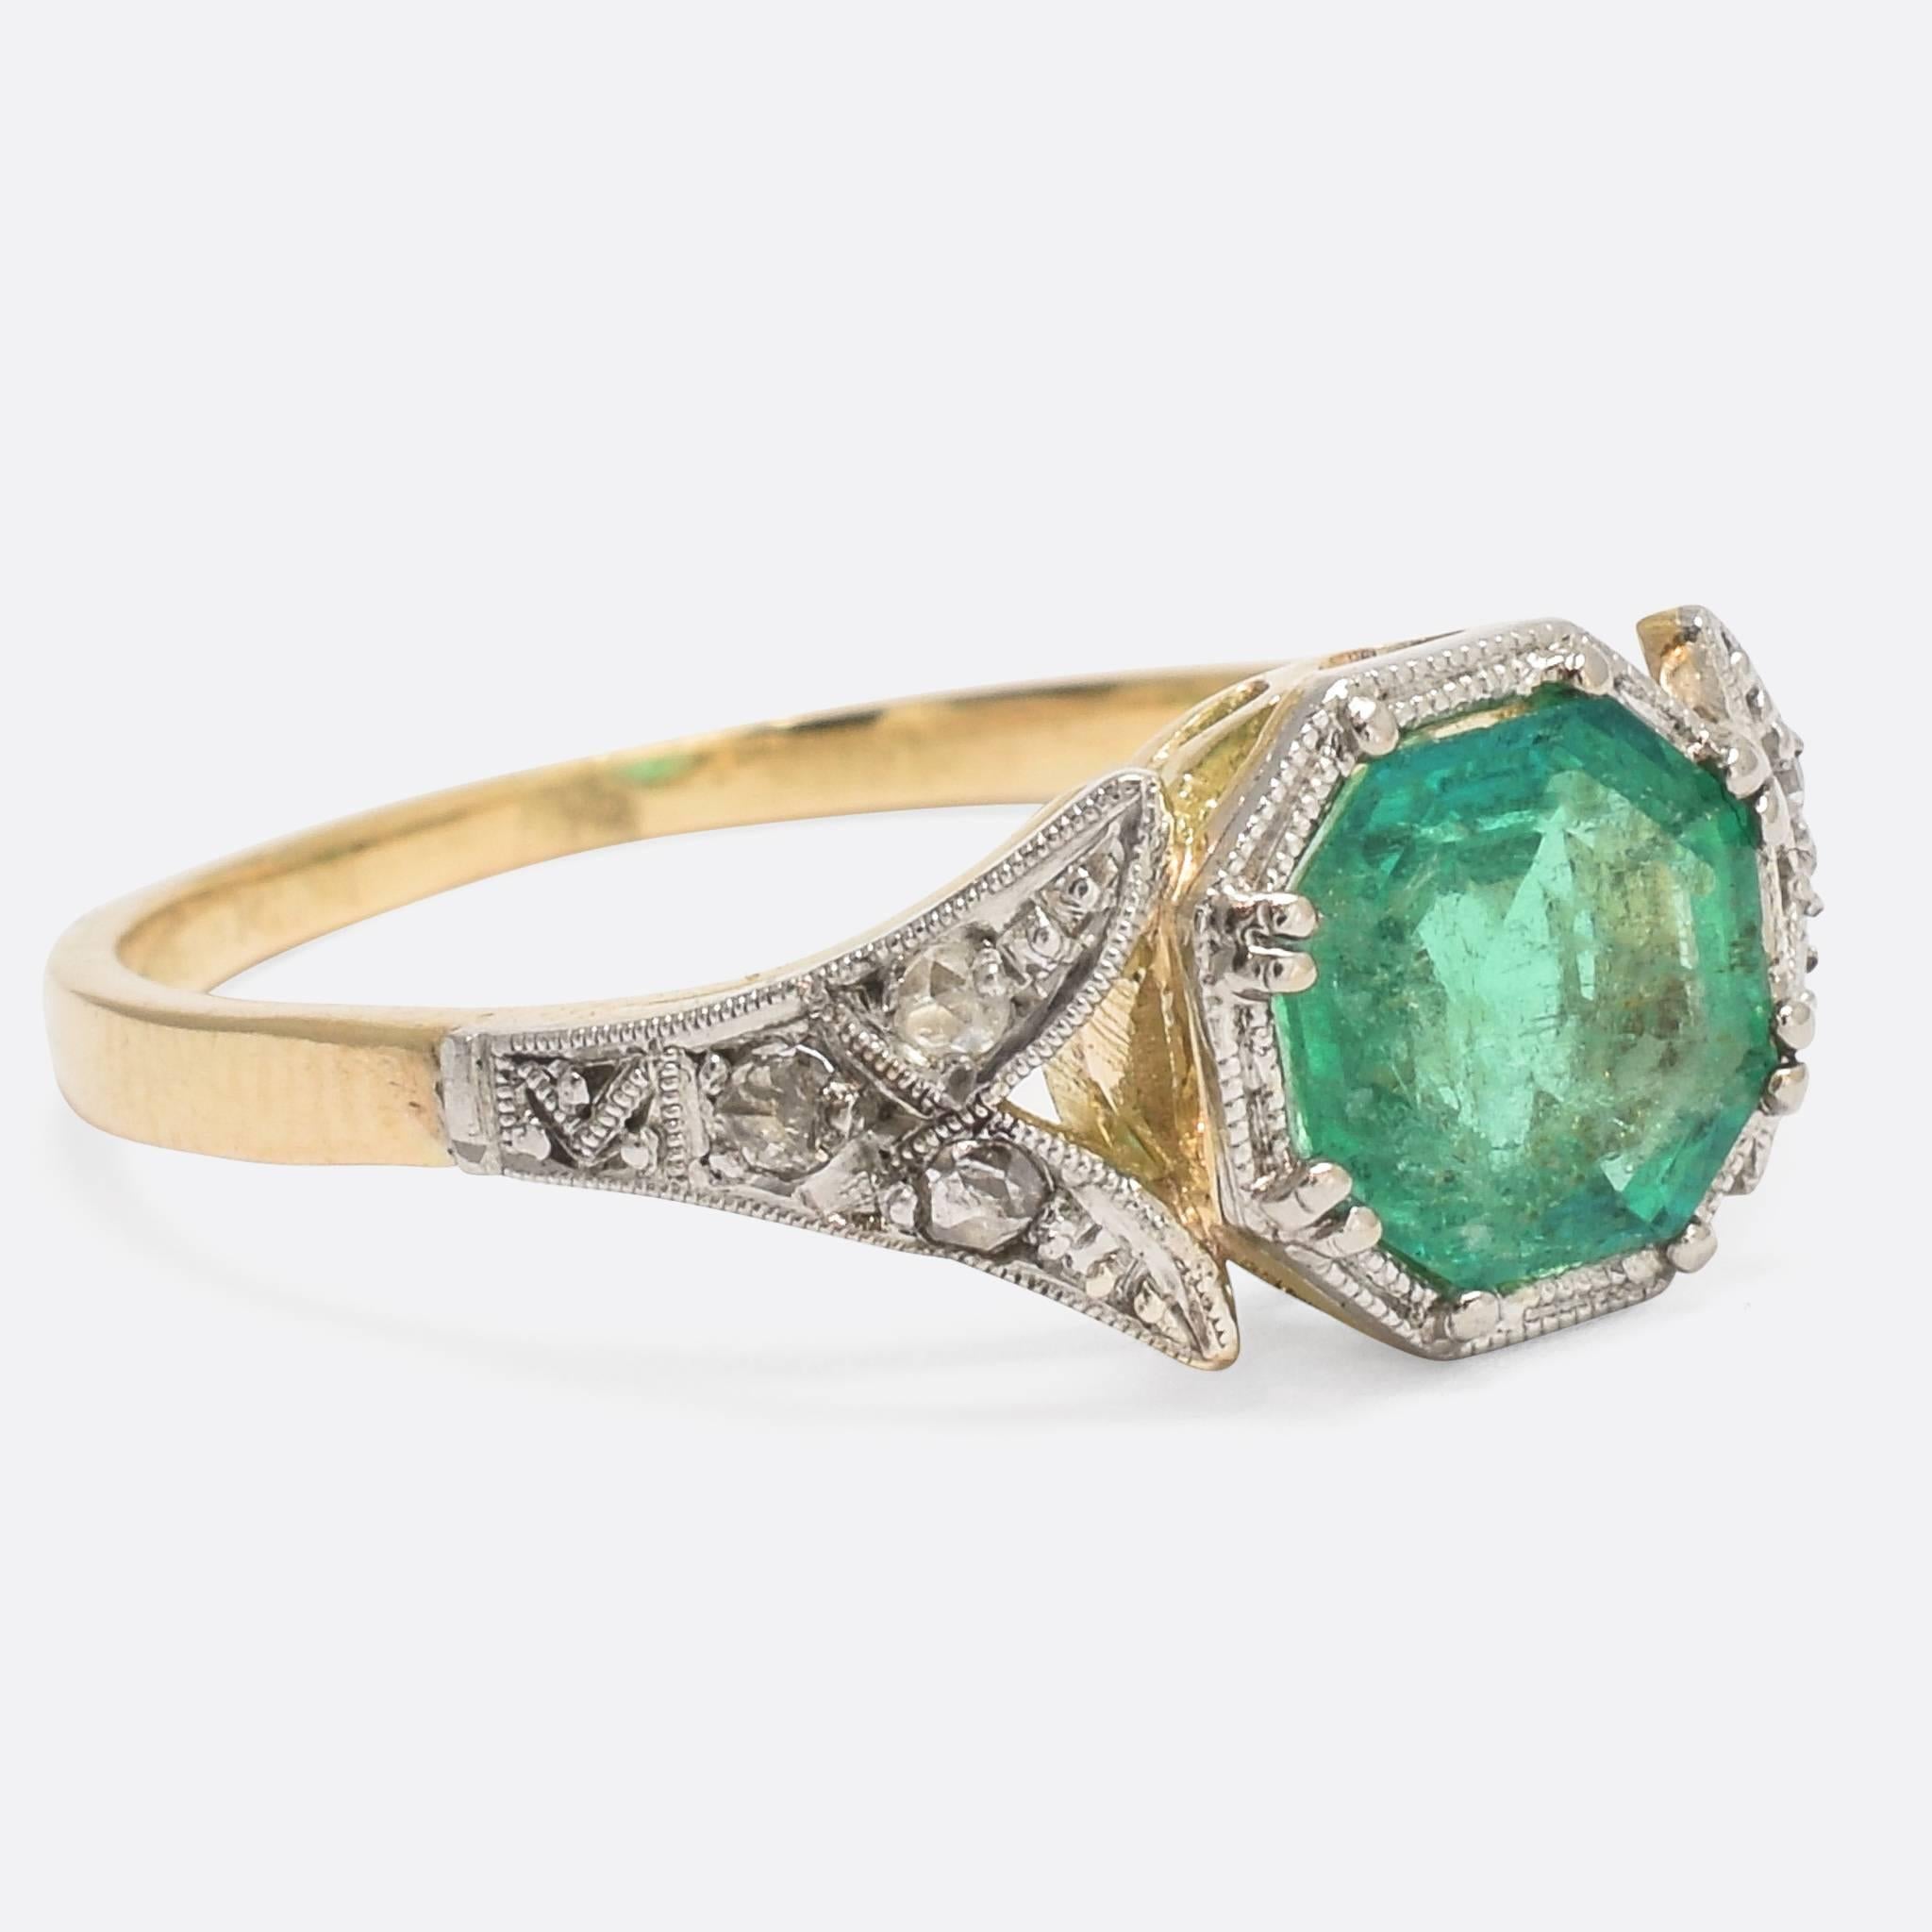 An exceptional early Deco Emerald solitaire ring, with fine millegrain settings and rose cut diamond split shoulders. The principal stone is a stunning Colombian emerald; and octagonal step cut of excellent colour and clarity.
The ring is modelled